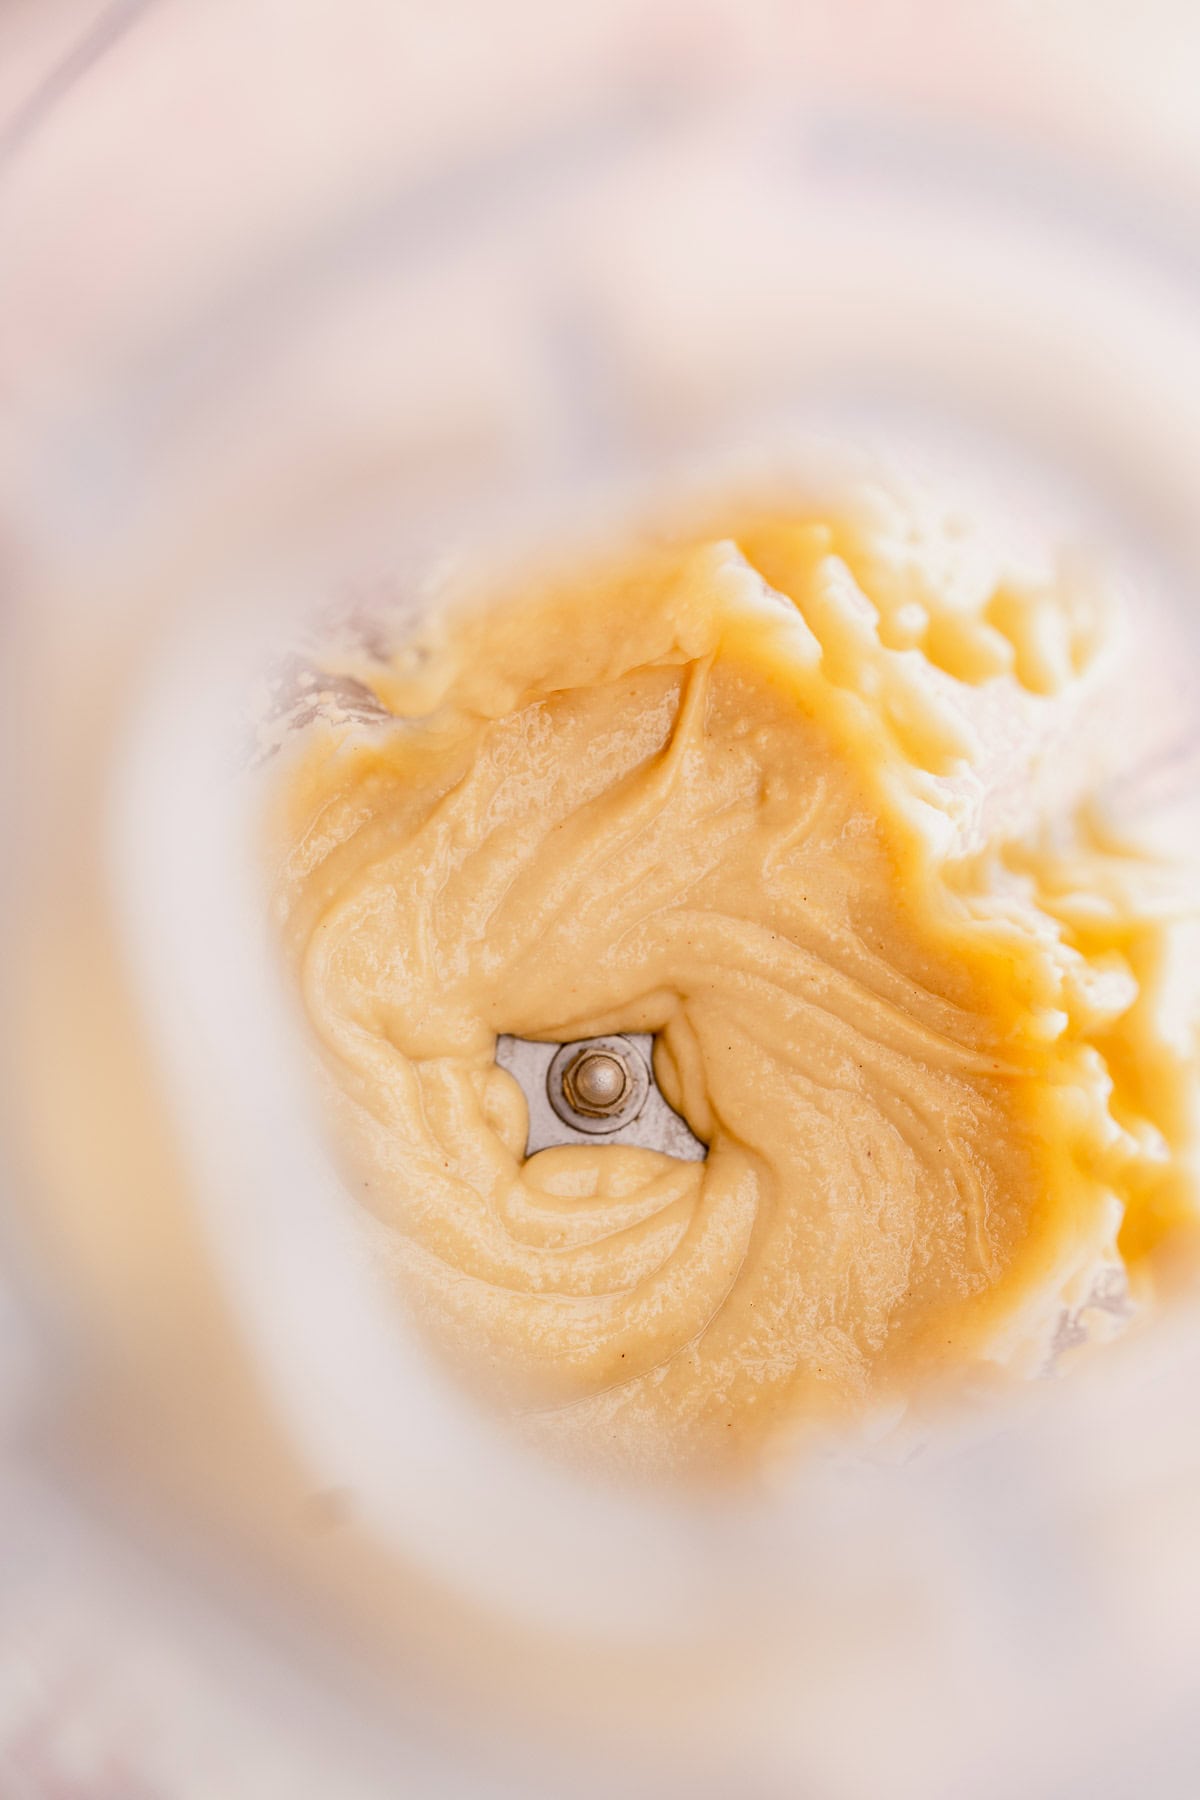 Close-up of macadamia nut butter being blended in a food processor, focusing on the swirling texture and blade.